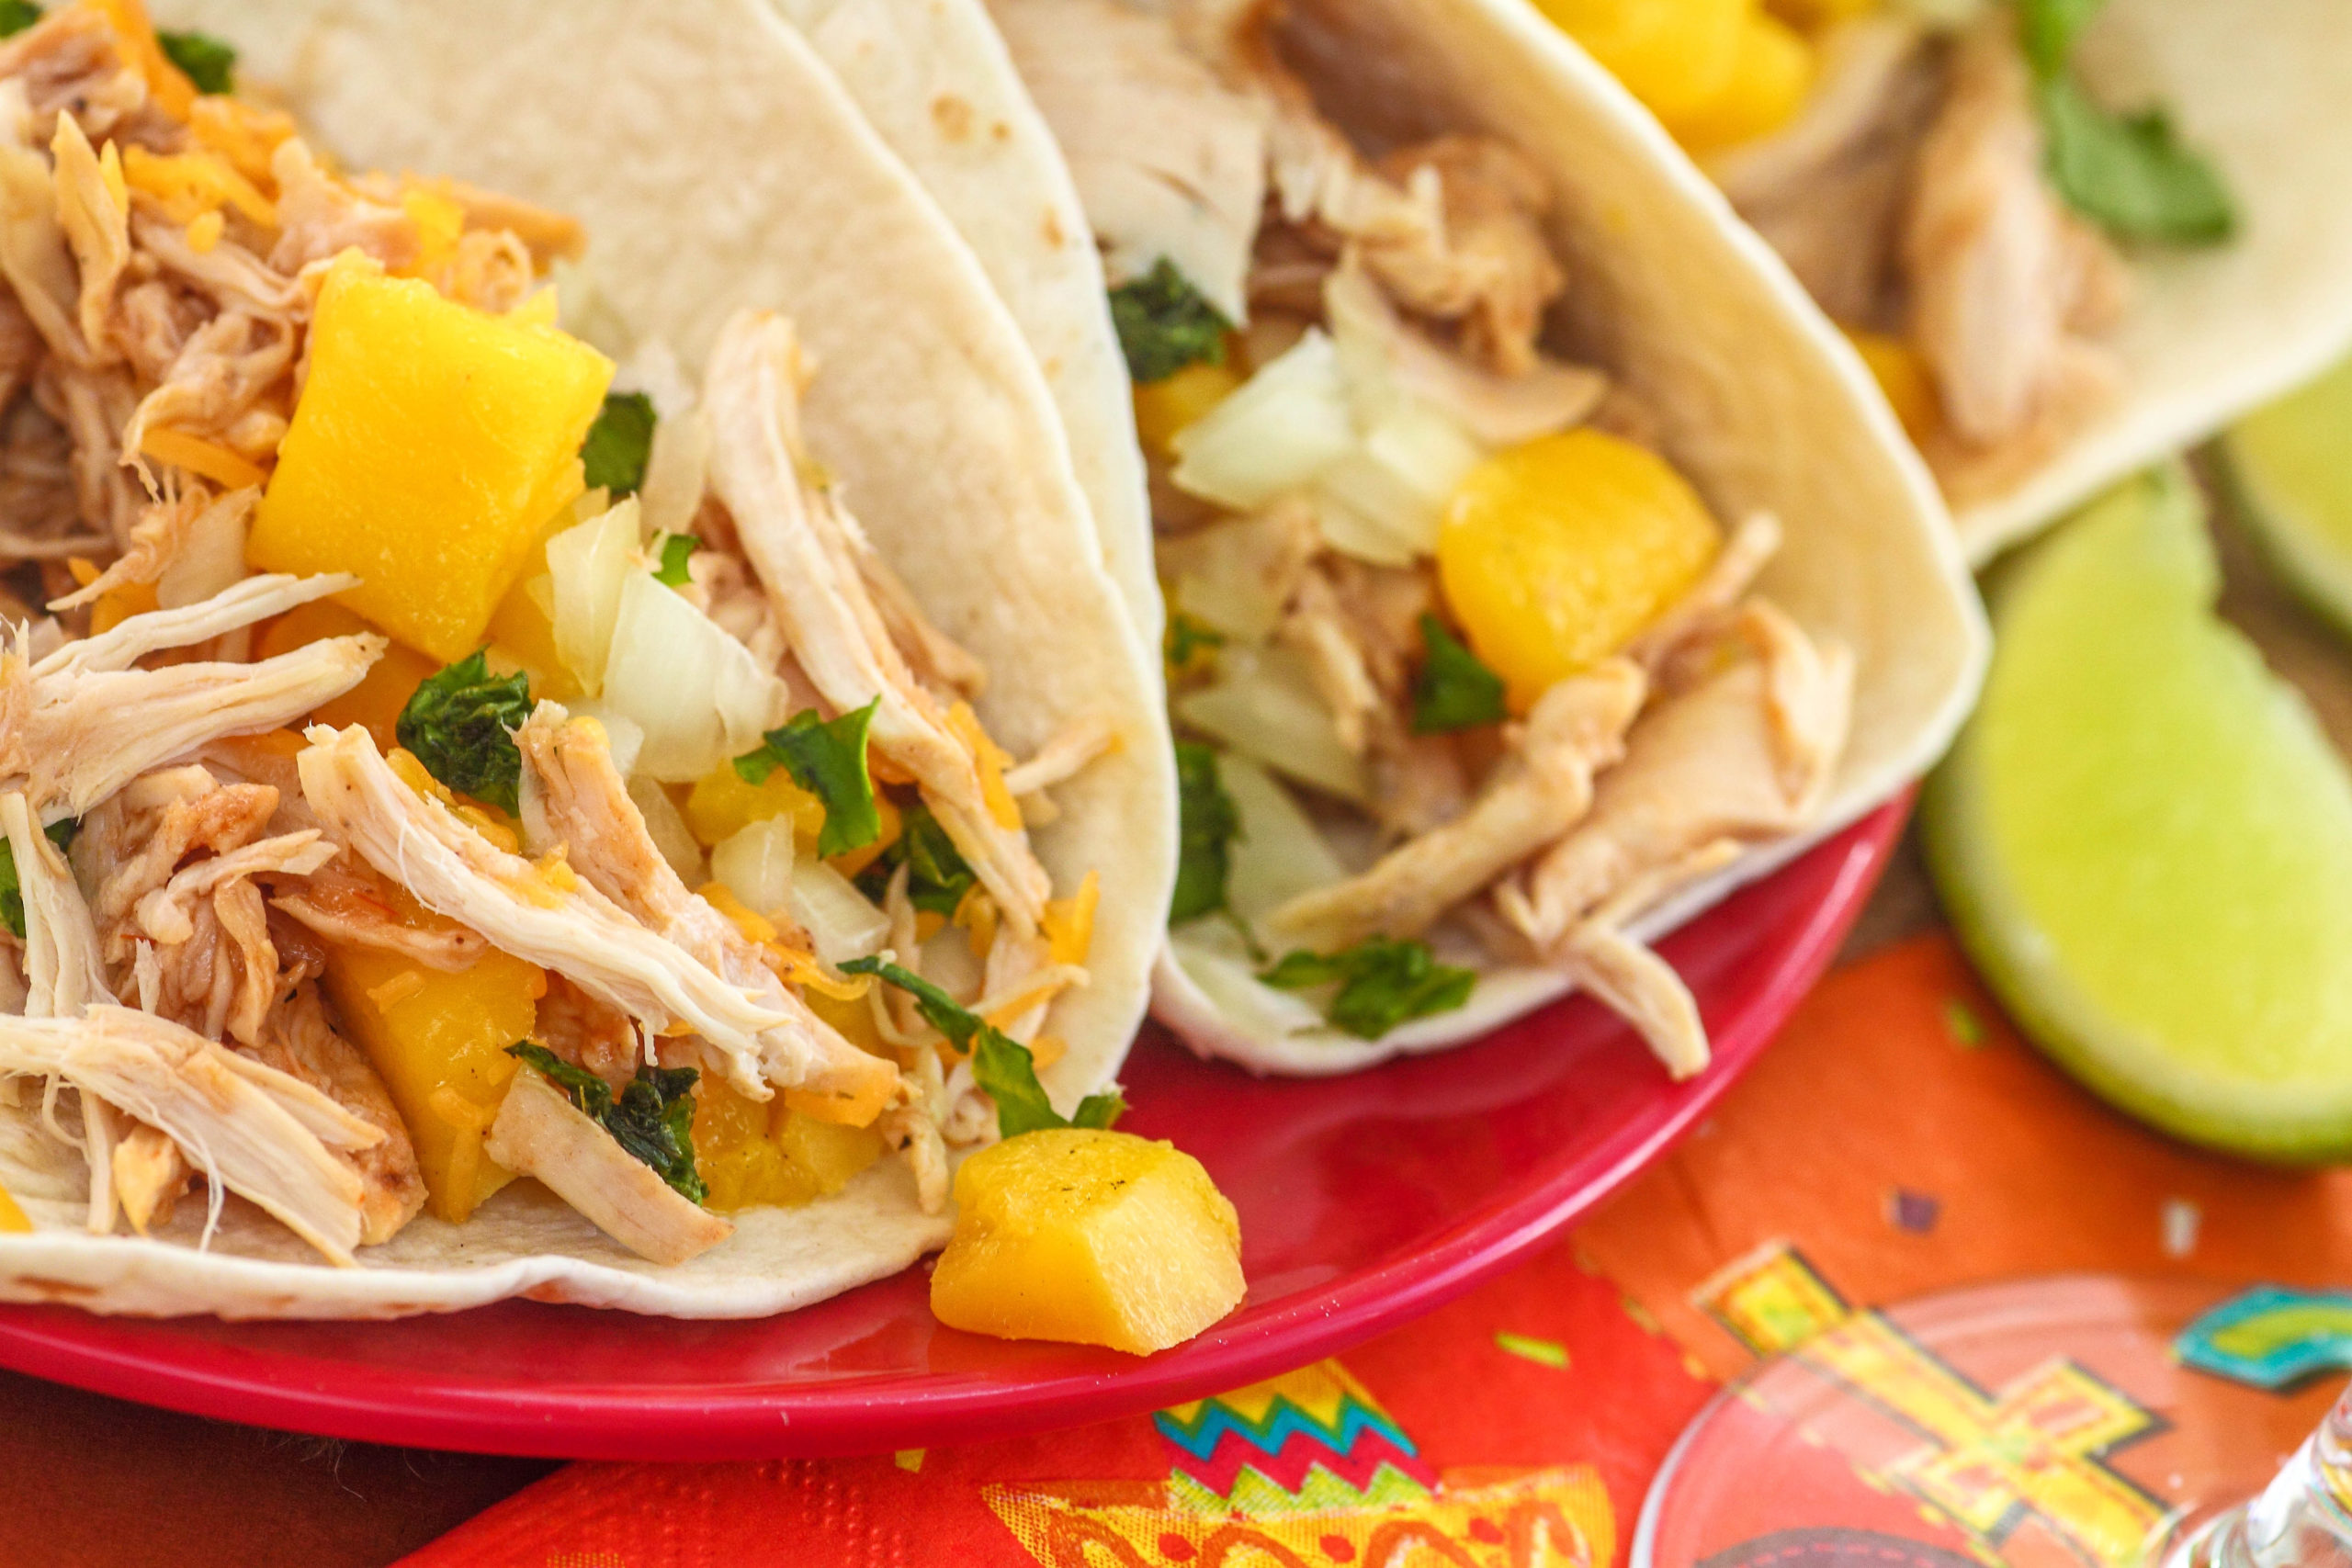 A perfect match: Cinco de Mayo meets 'Taco Tuesday' - With a nod to both Taco Tuesday and Cinco de Mayo, here are some tasty taco tips. #CincoDeMayo #TacoTuesday